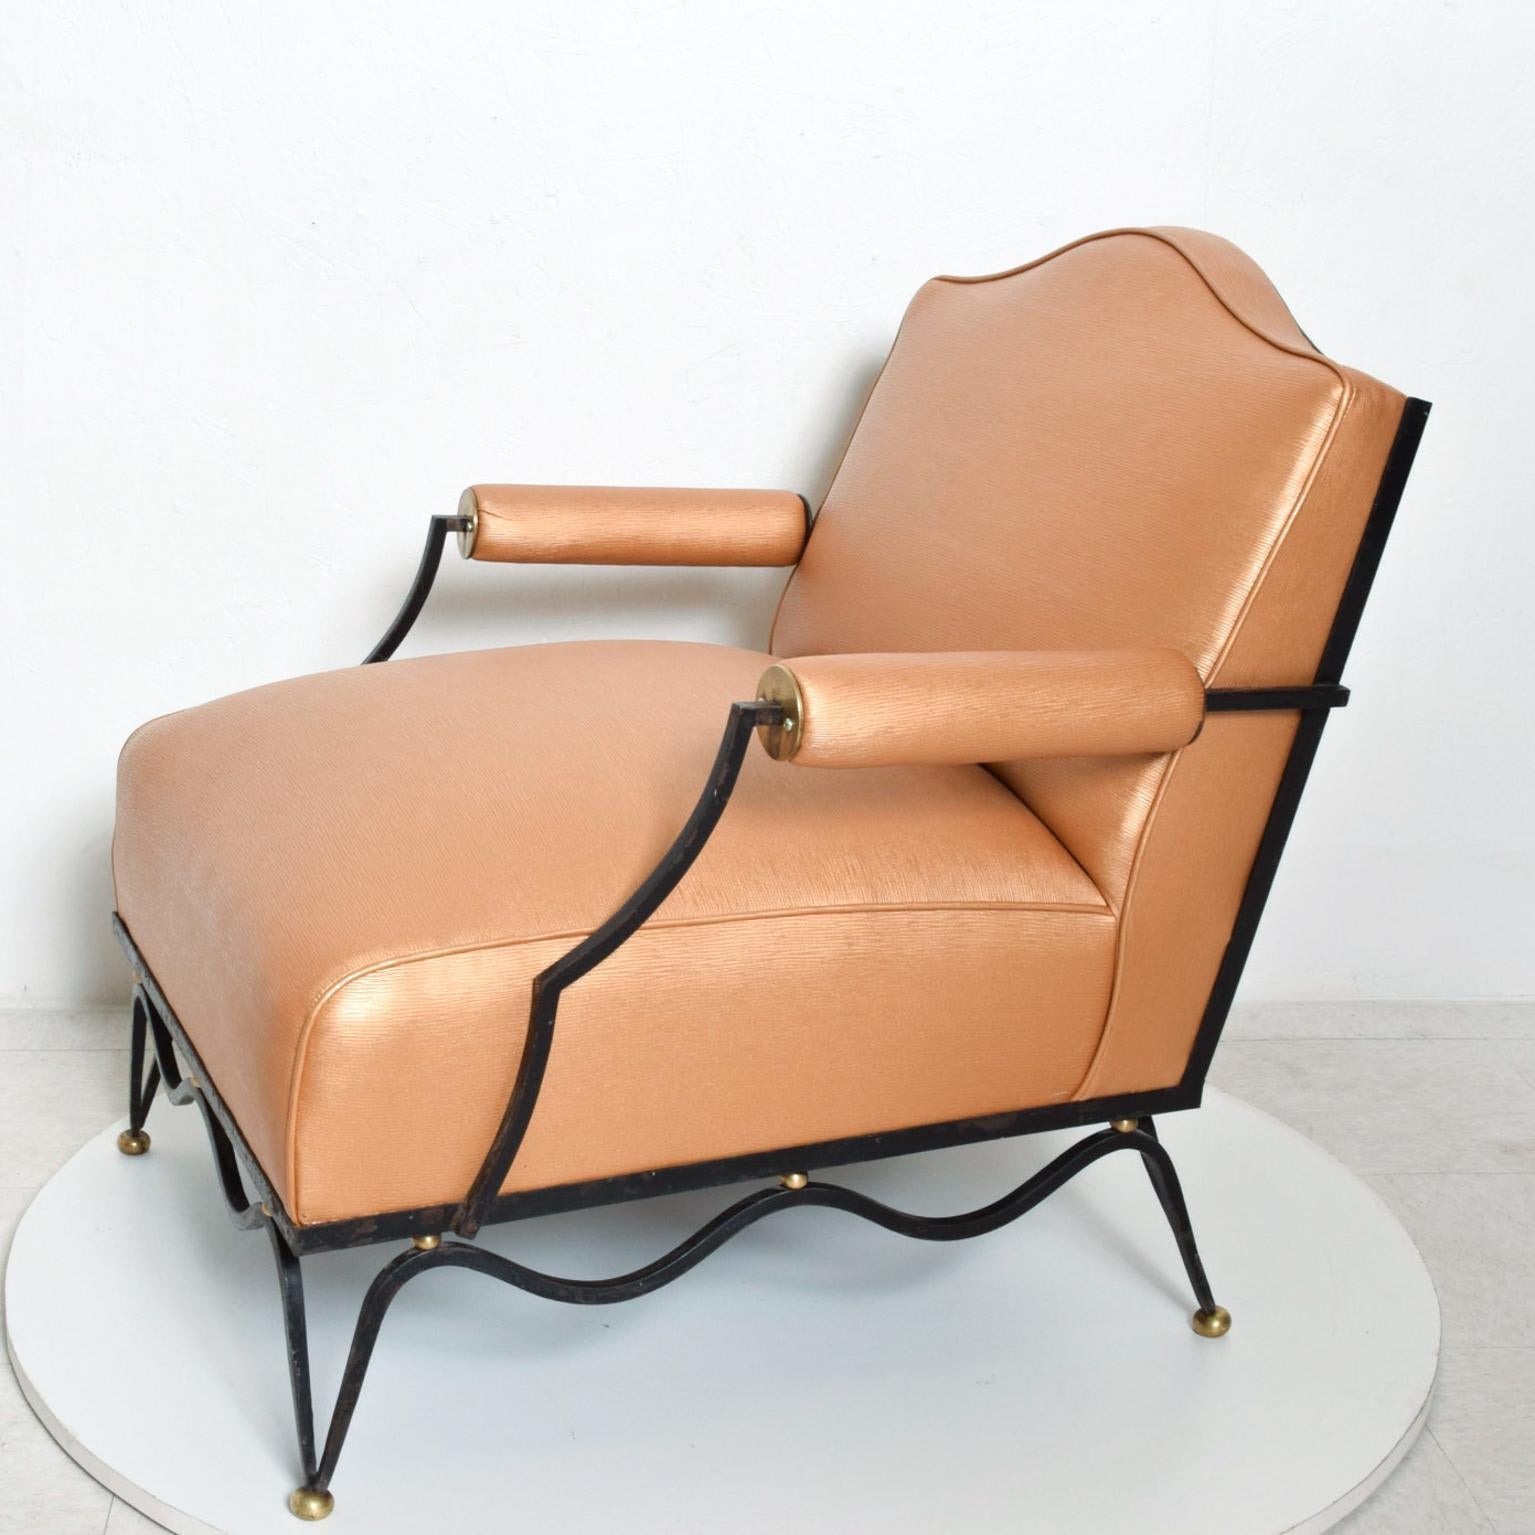 Mid-20th Century Mexican Modernist Armchairs Attributed to Arturo Pani French Neoclassical, Pair